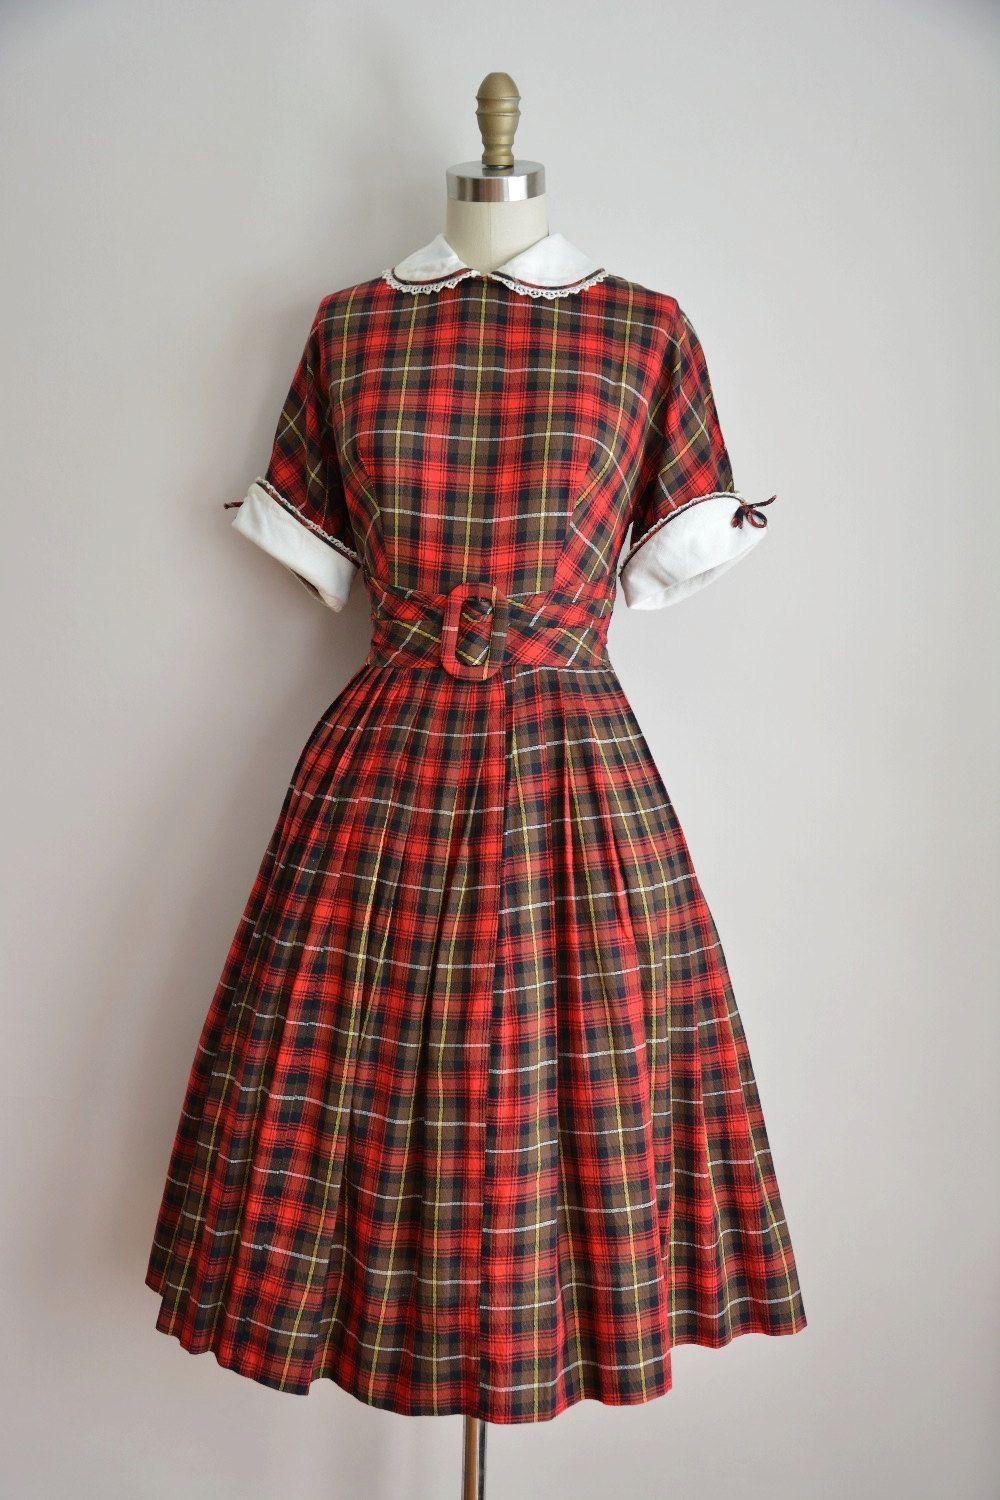 Red and Yellow Peter Pan Logo - Vintage 1950s cotton plaid dress. Brown, red, yellow and white plaid